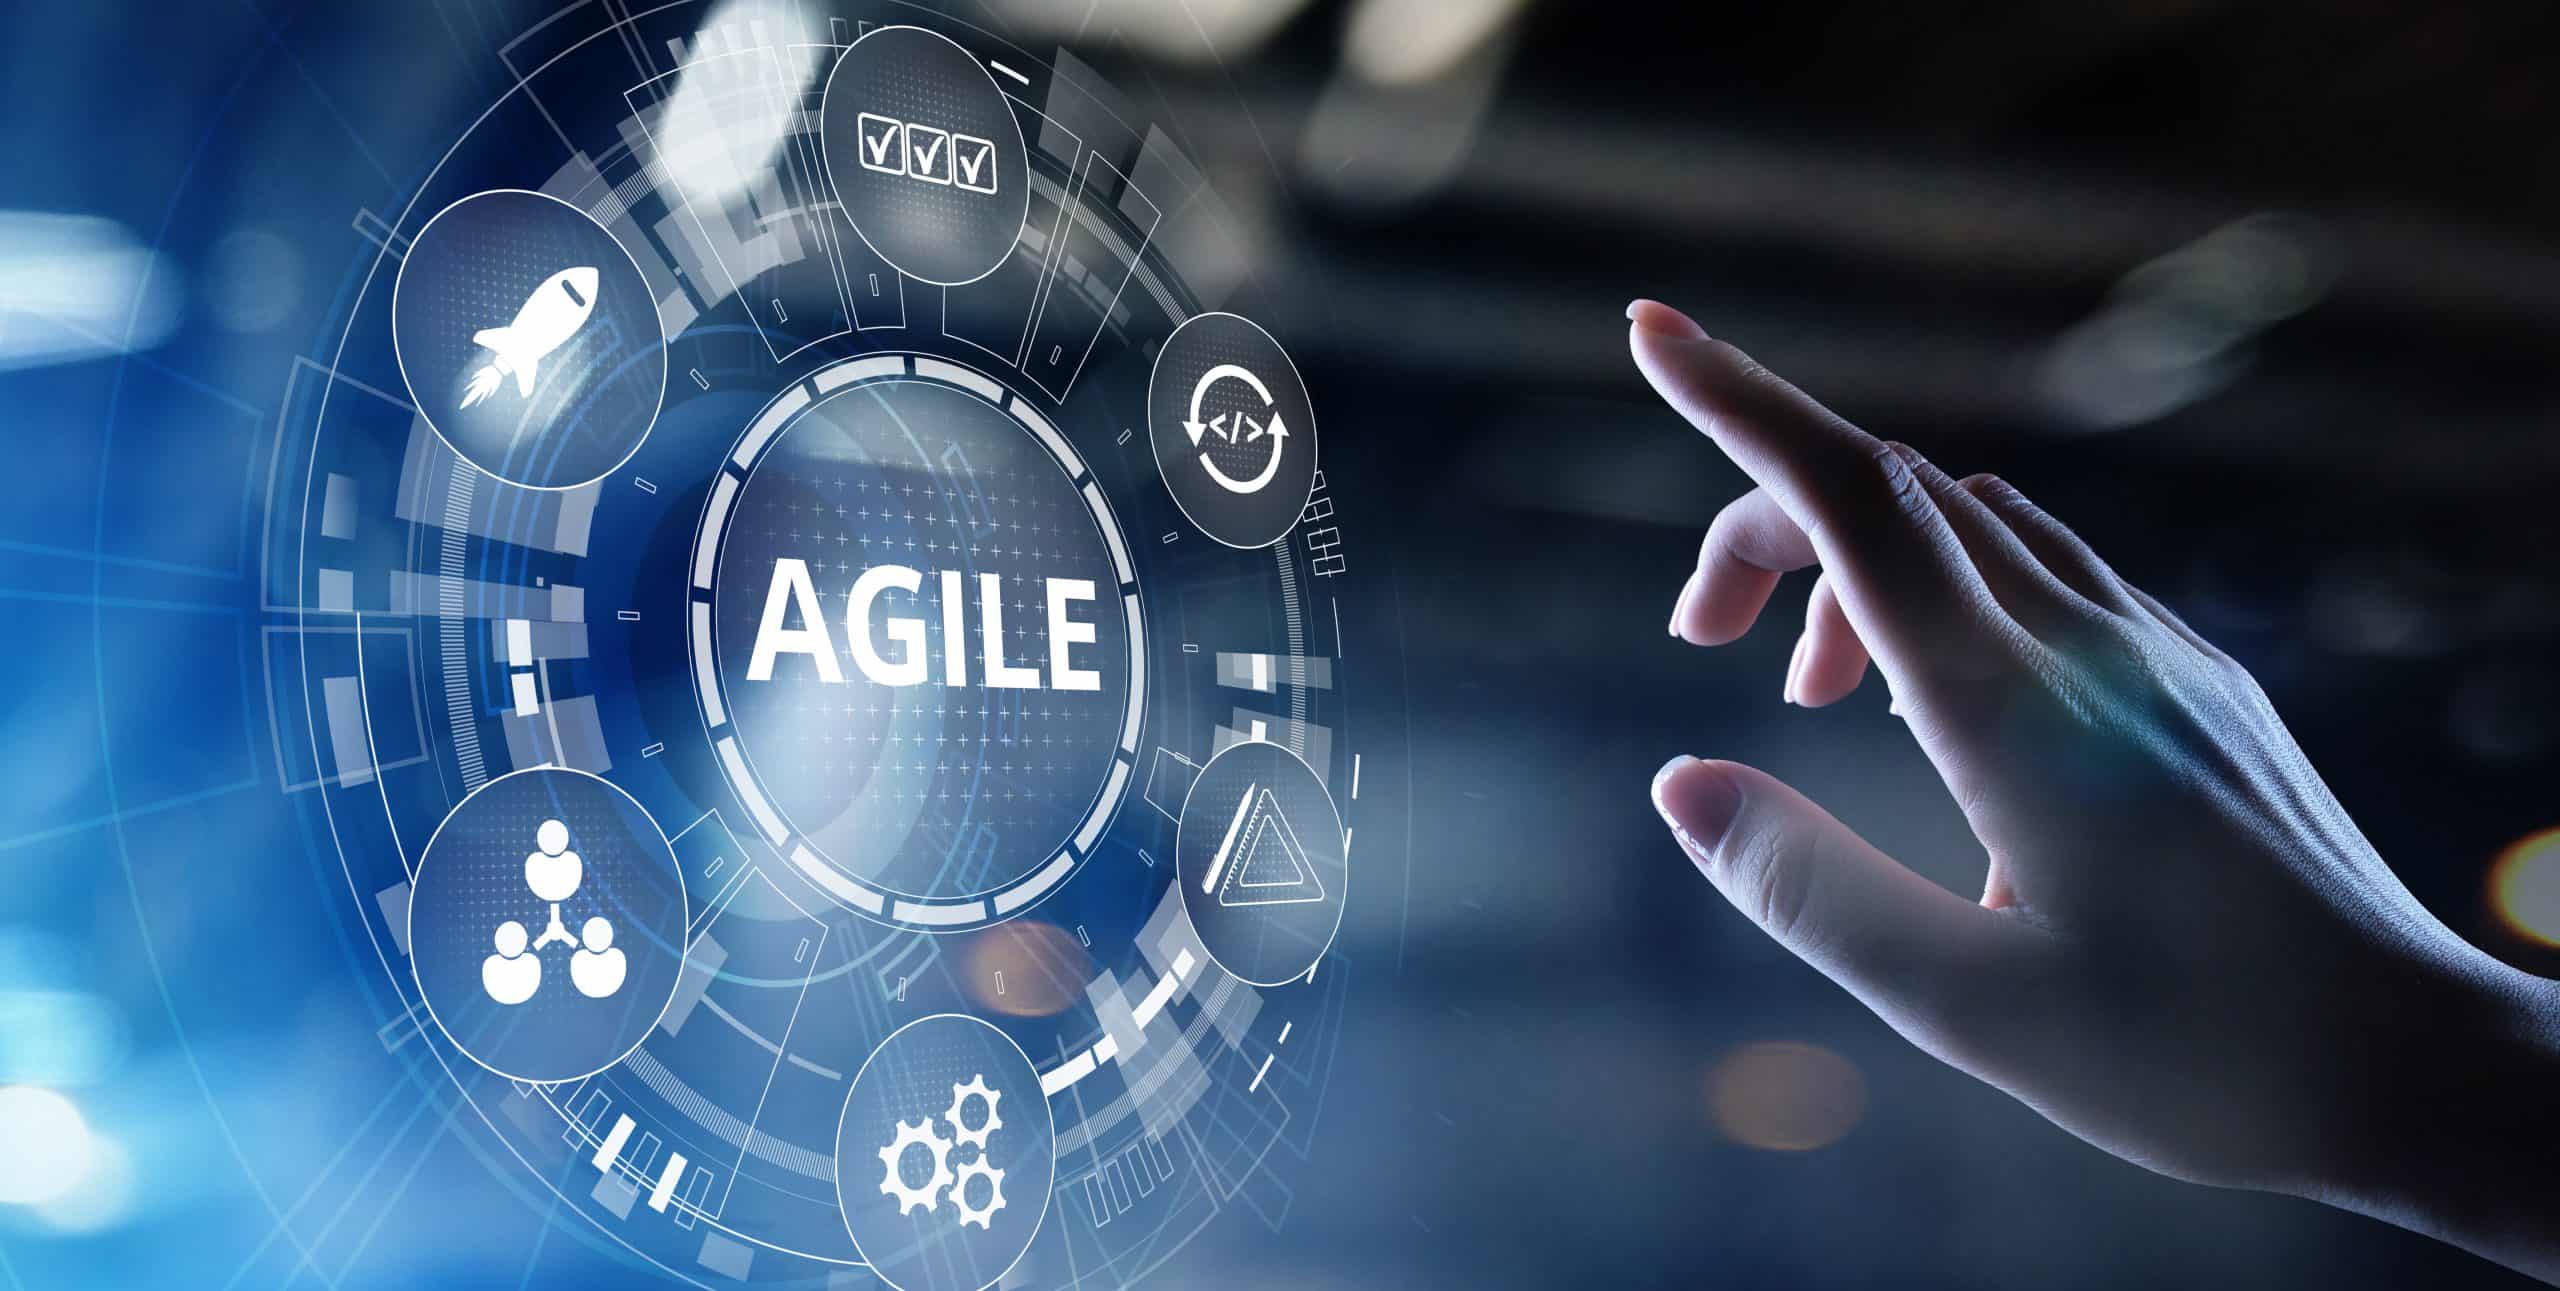 agile-project-management-popular-frameworks-in-2021-itchronicles